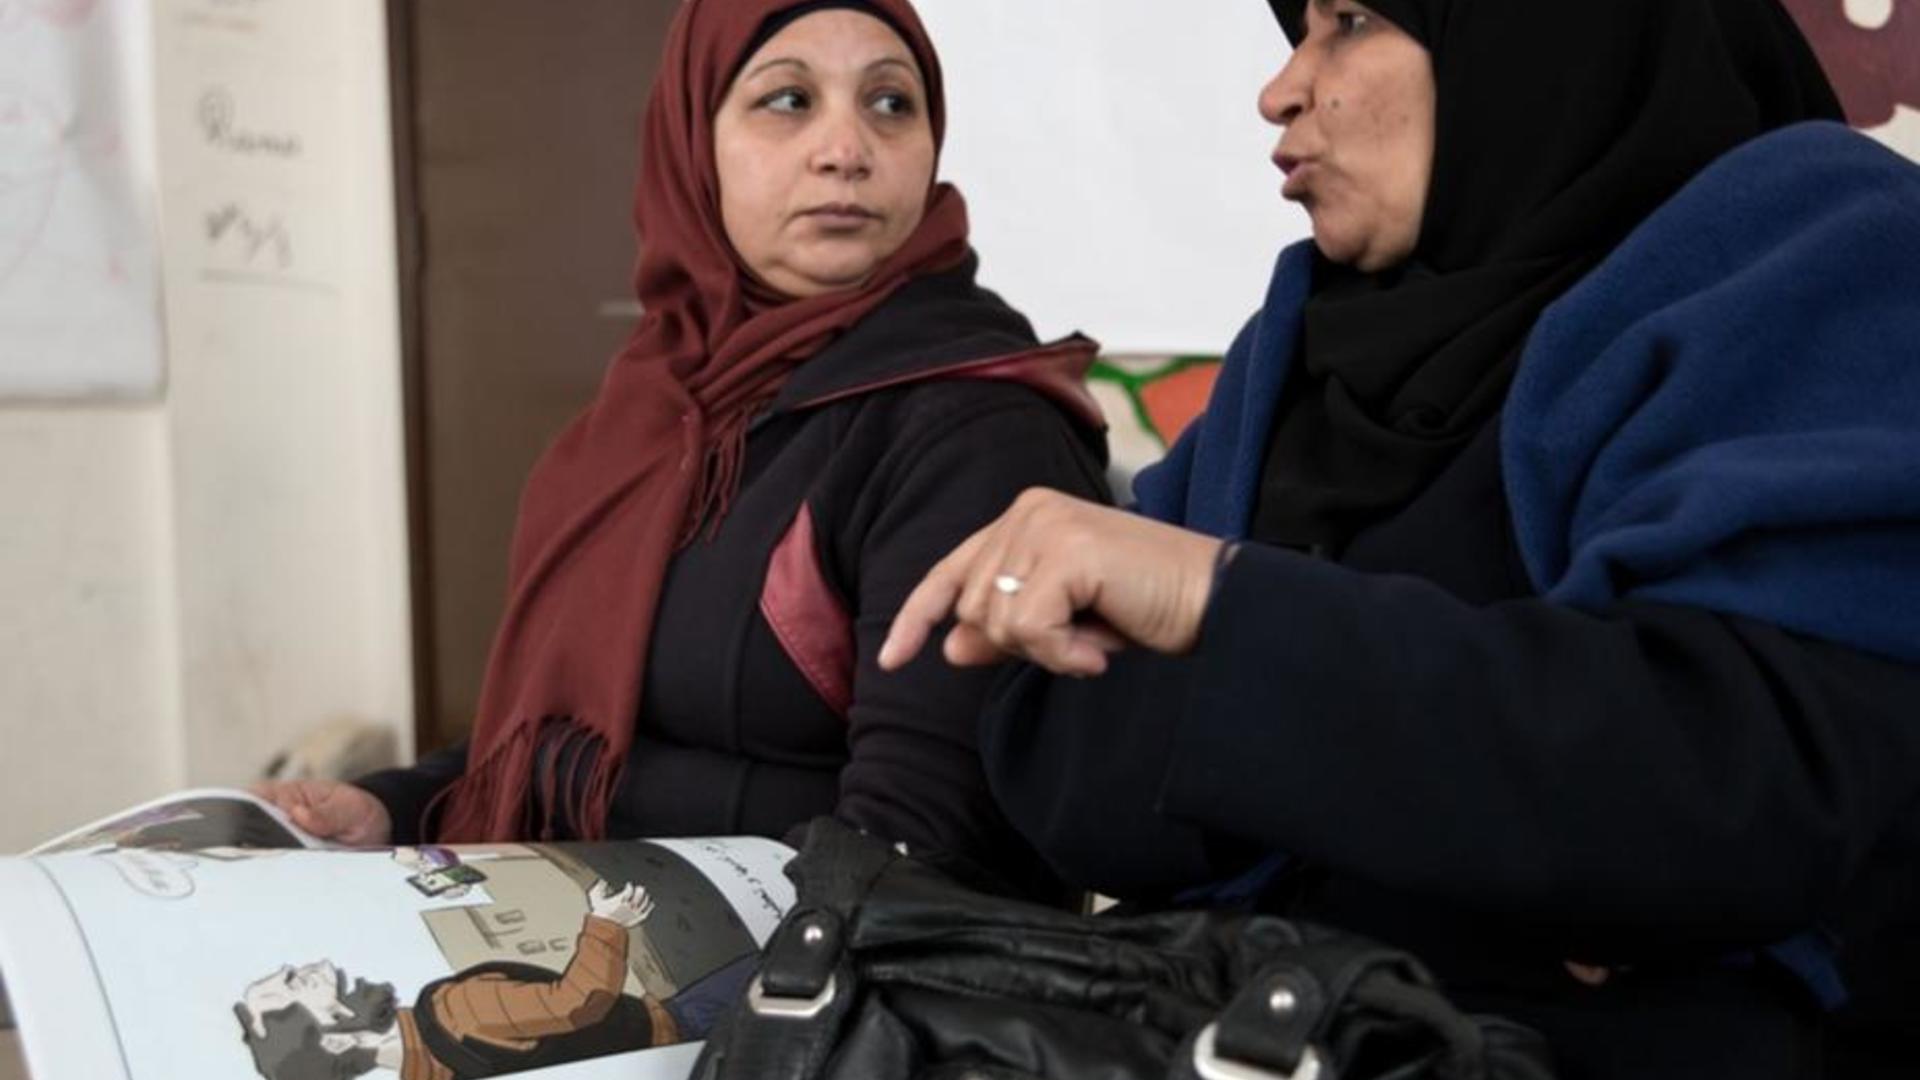 Syrian women look at an IRC-created comic book and discuss decisions the main character makes